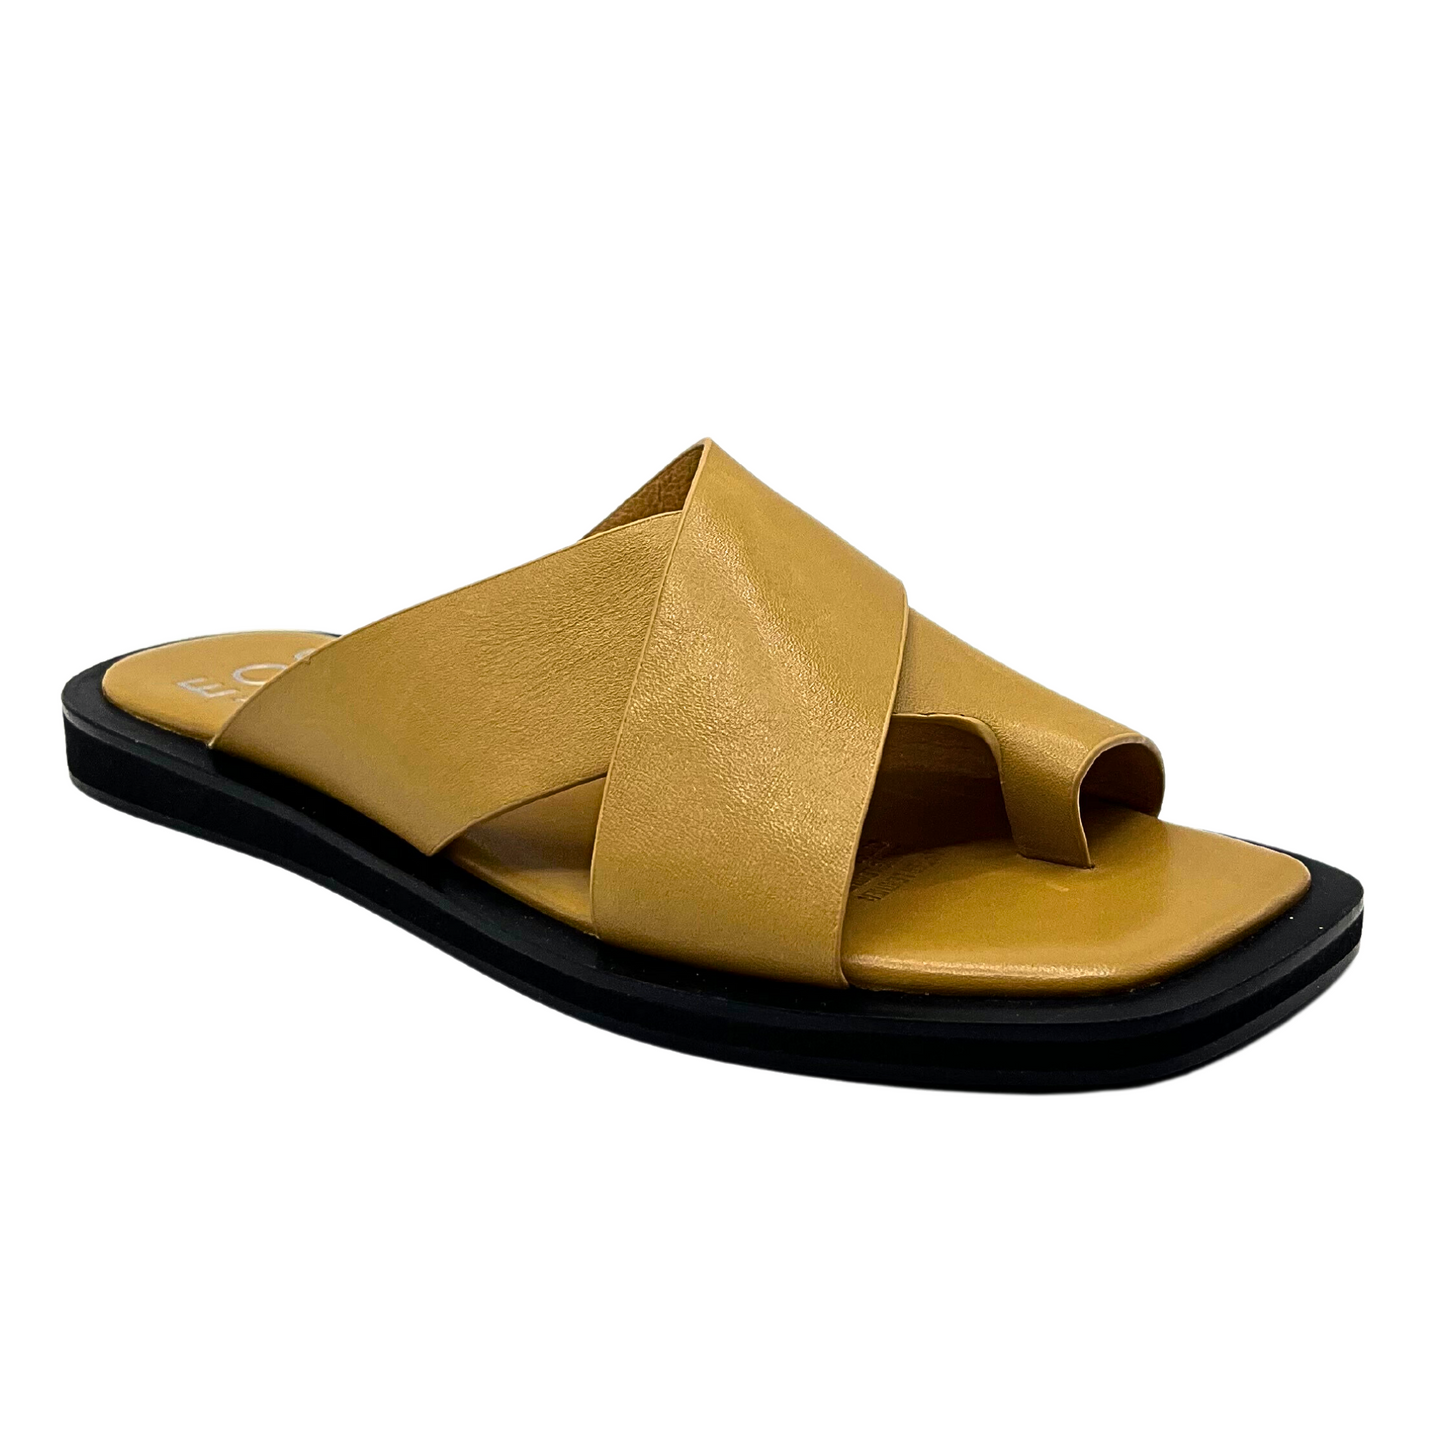 Angled side view of a flat mule sandal in a tan/gold color.  